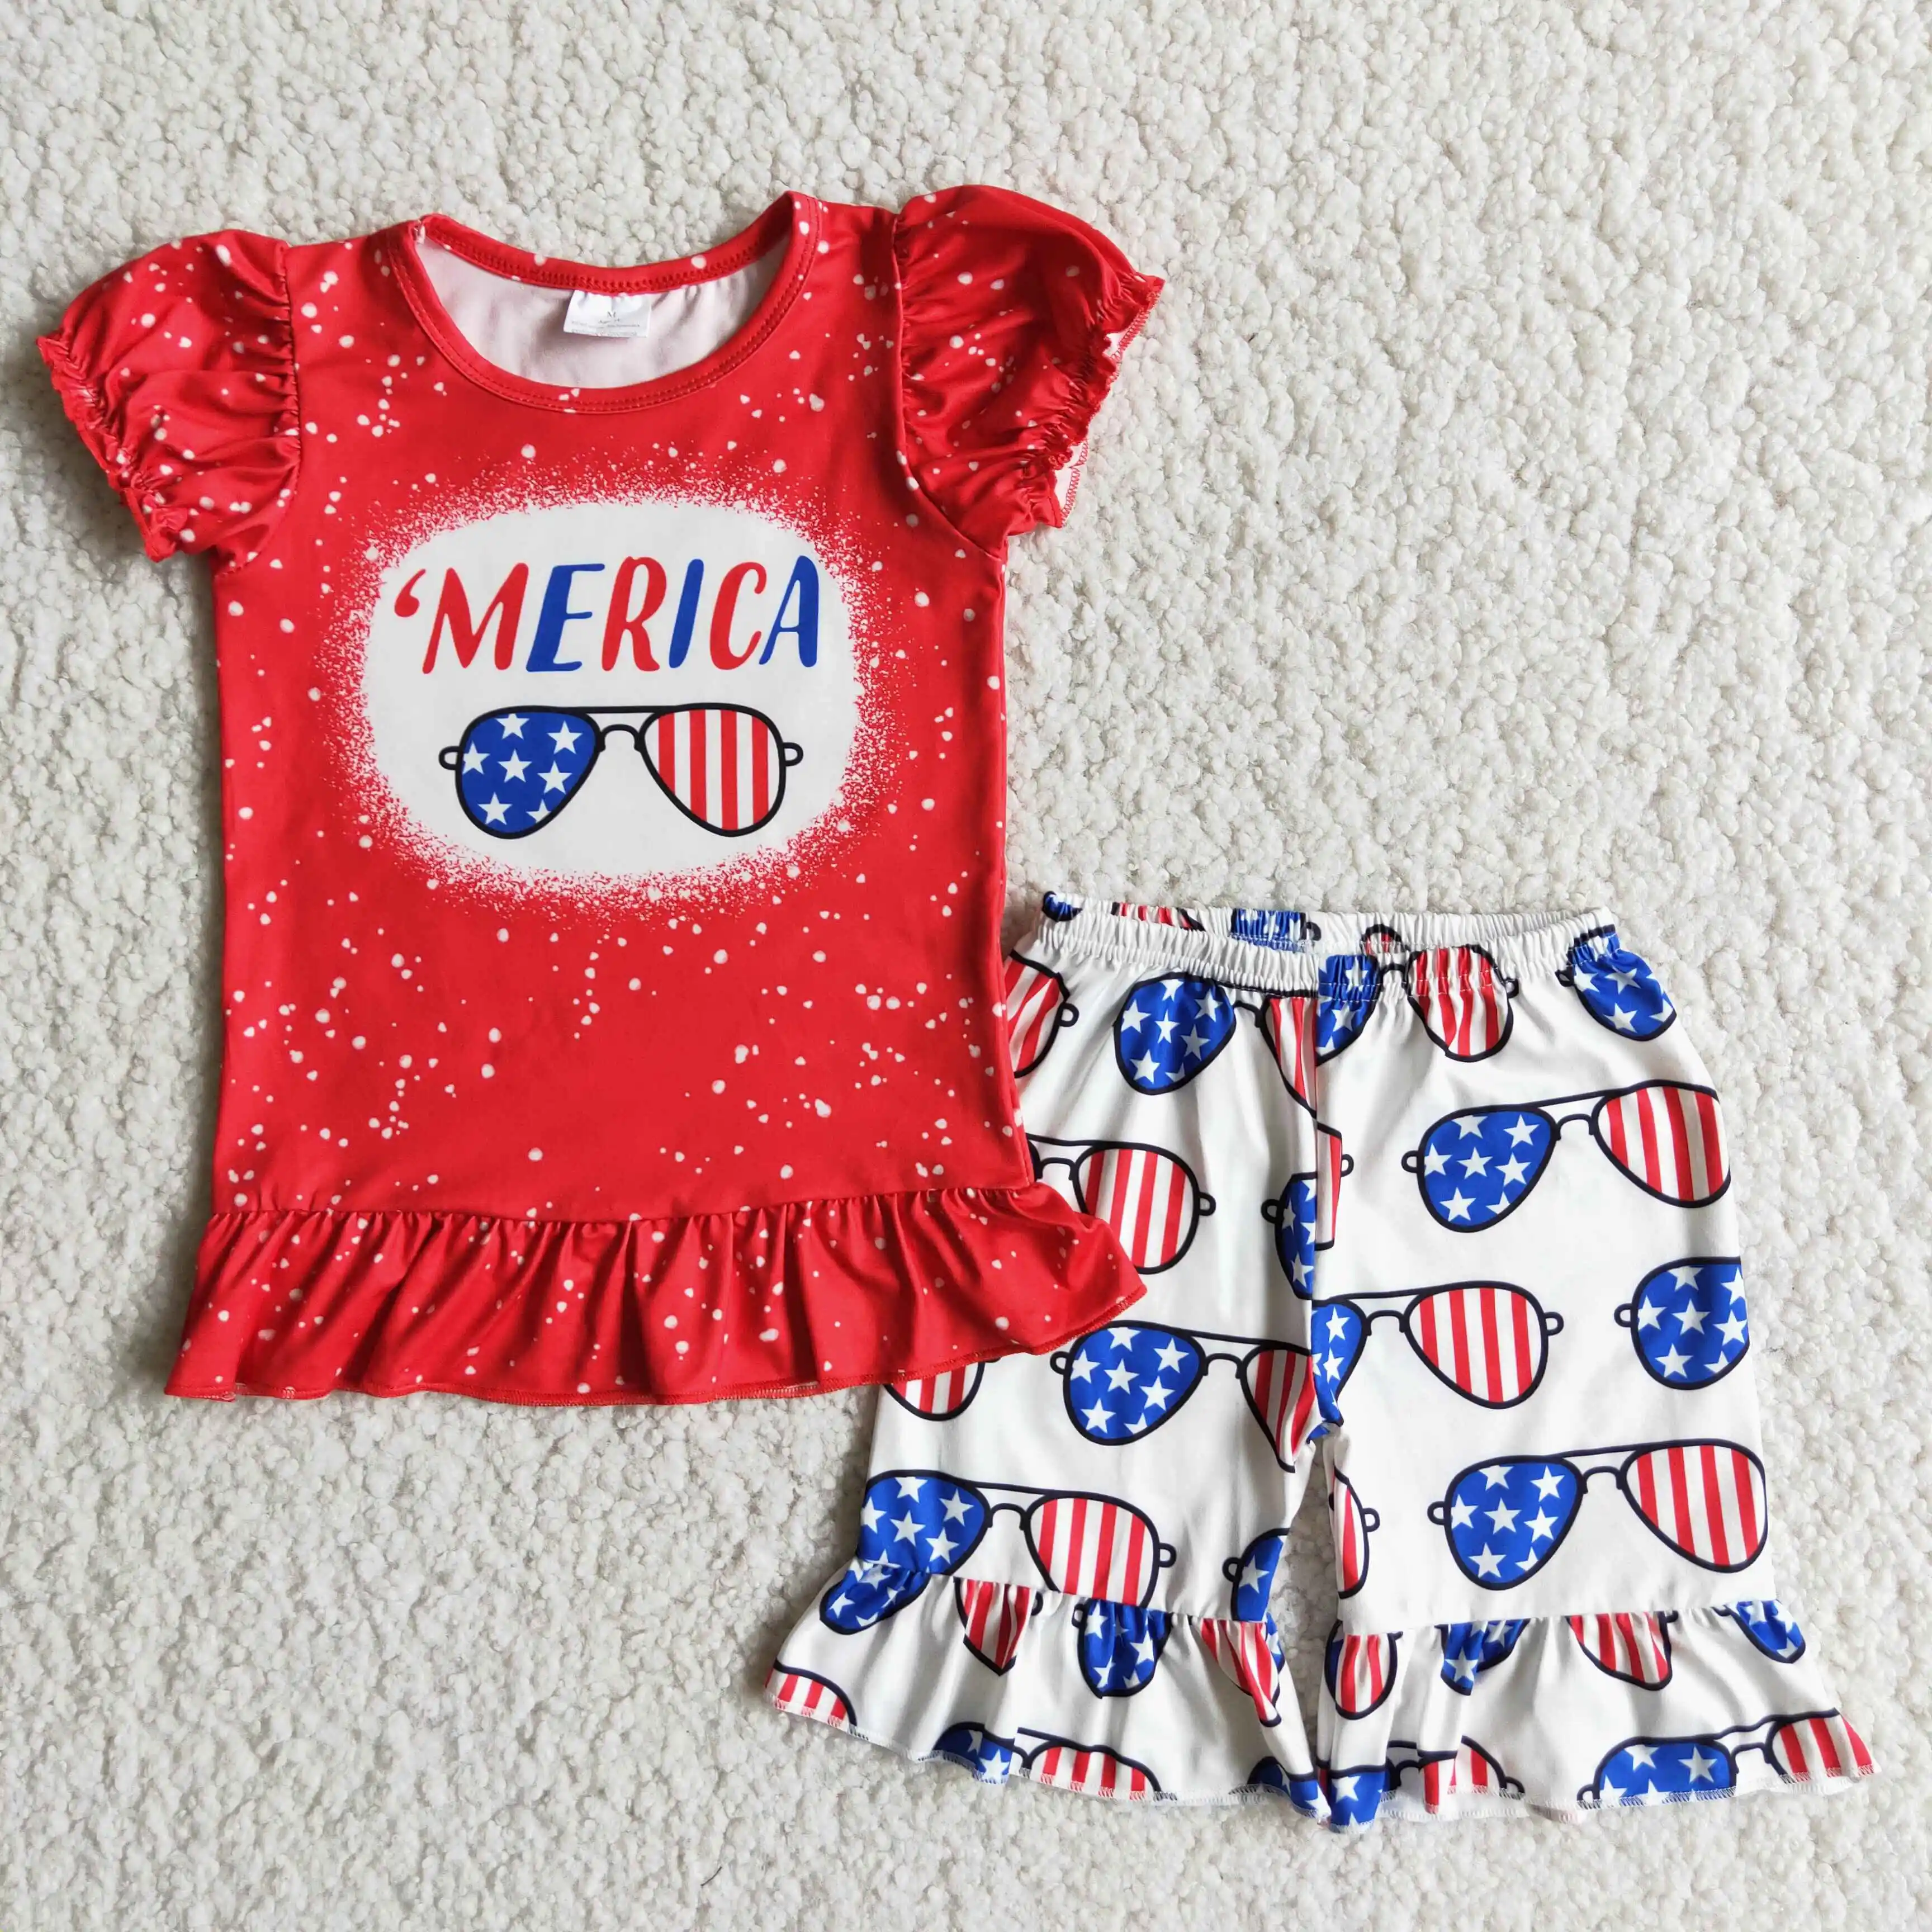 

USA July Fourth Baby Girls Outfits Toddlers Bubble Sleeves Top Sunglasses Shorts Kids Clothing Children Boutique Clothes Sets